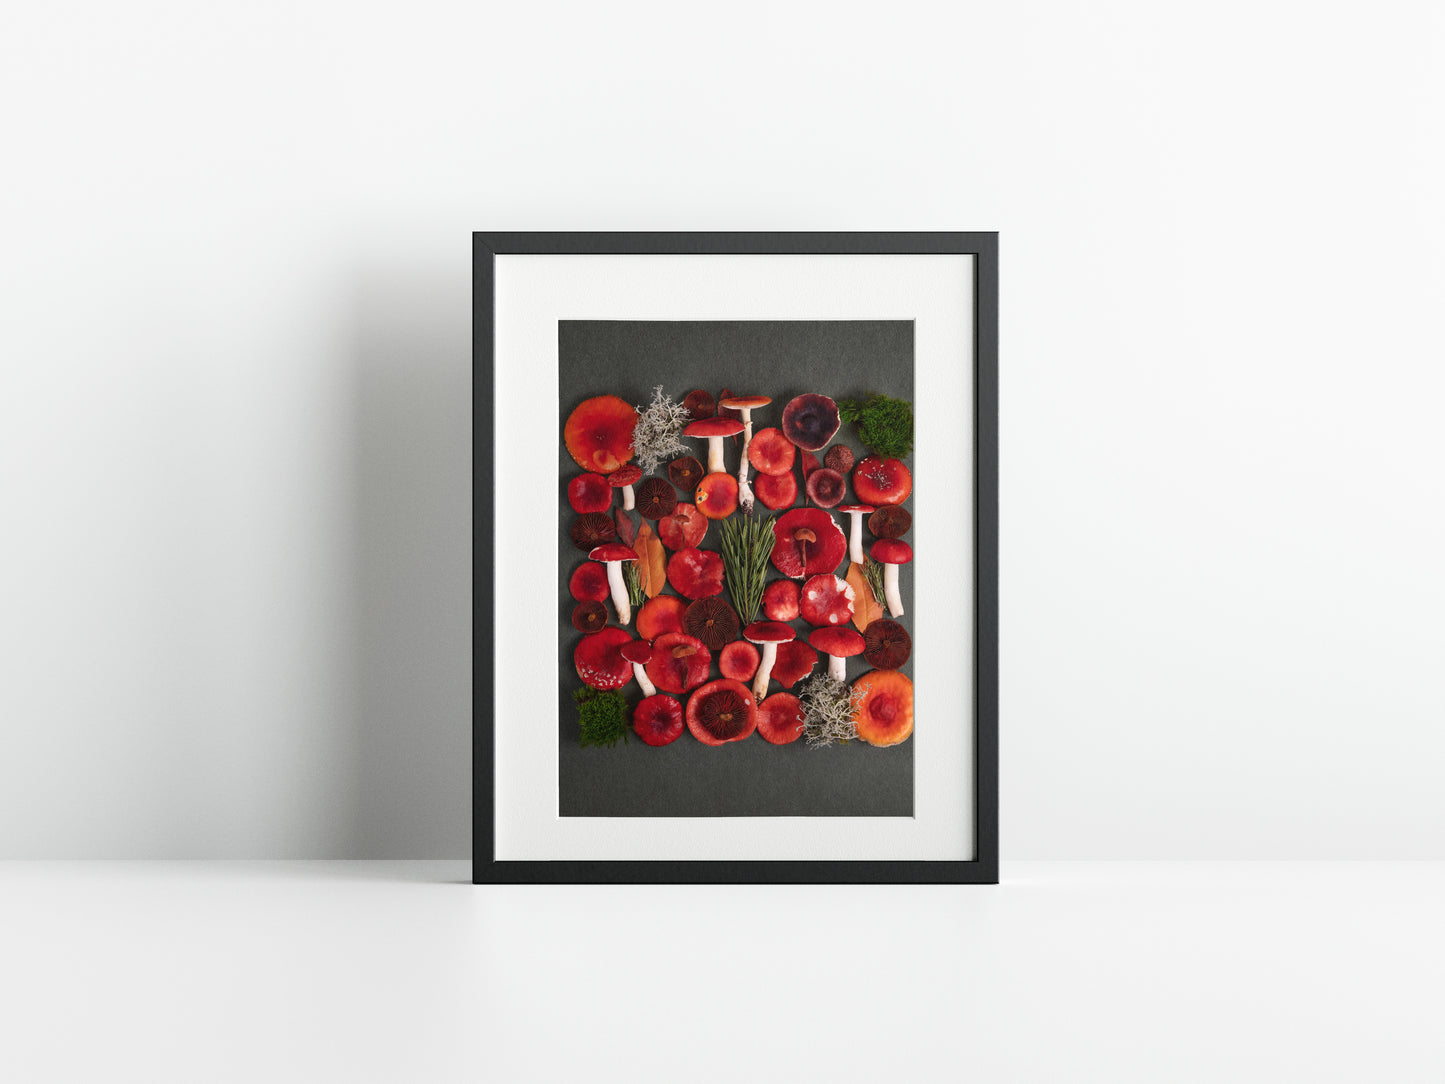 Fineart Print "Red & Green"